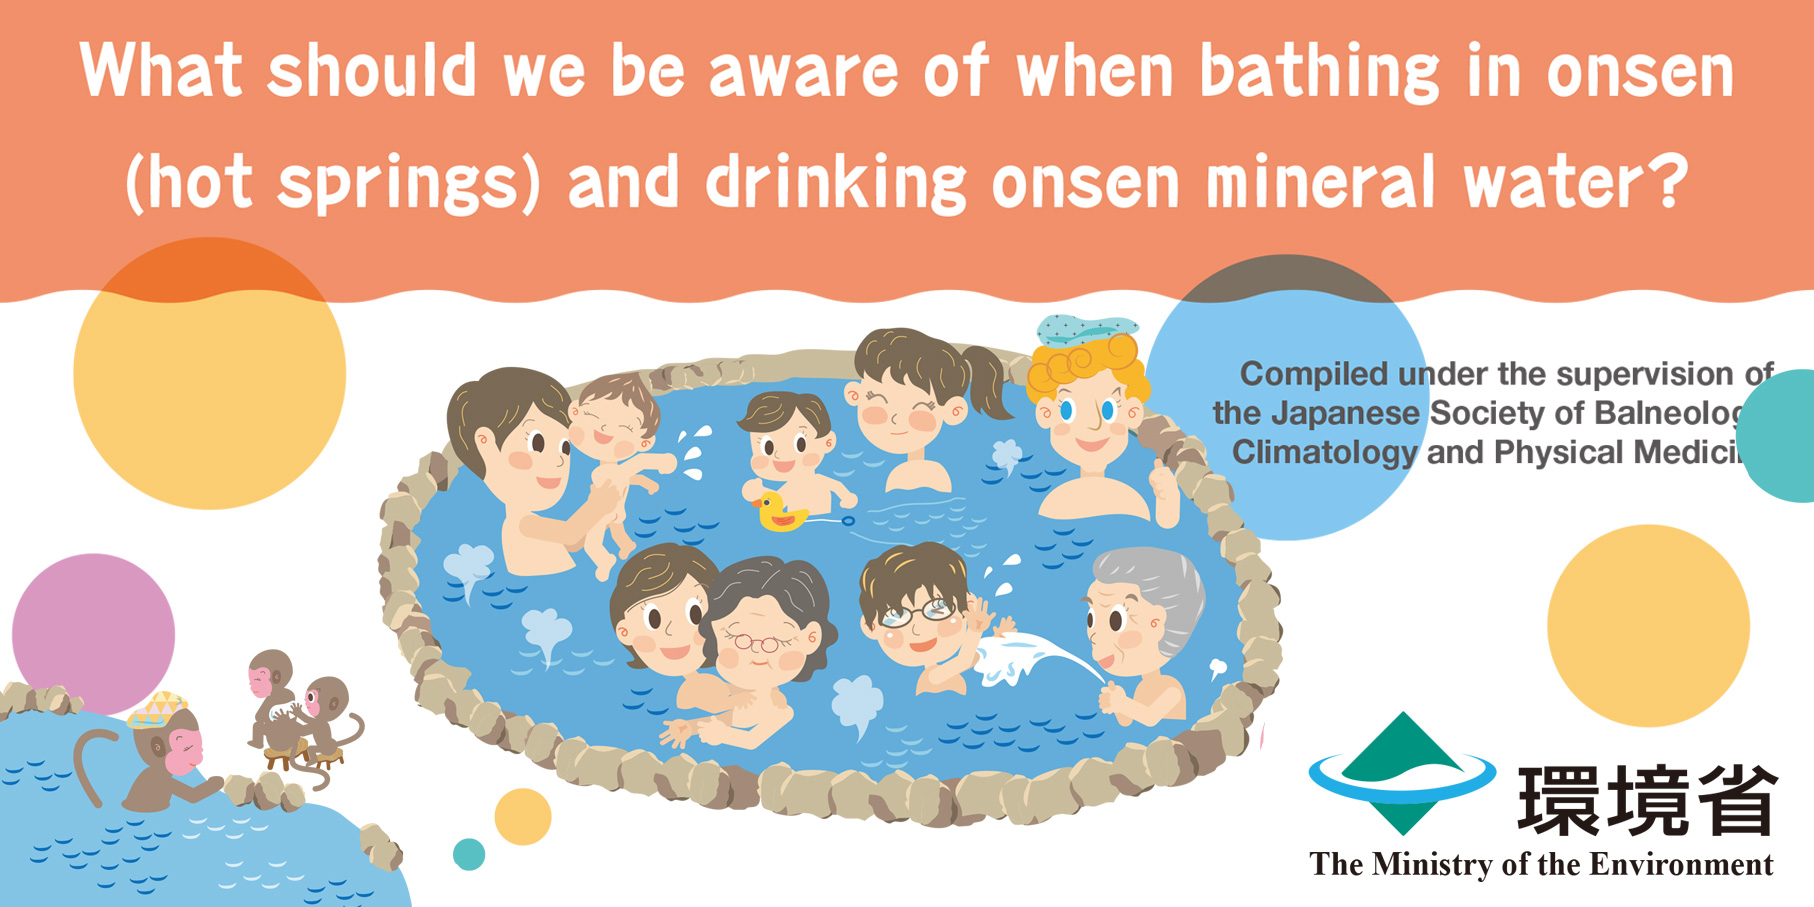 The ABCs for the Safe and Secure Use of Onsen